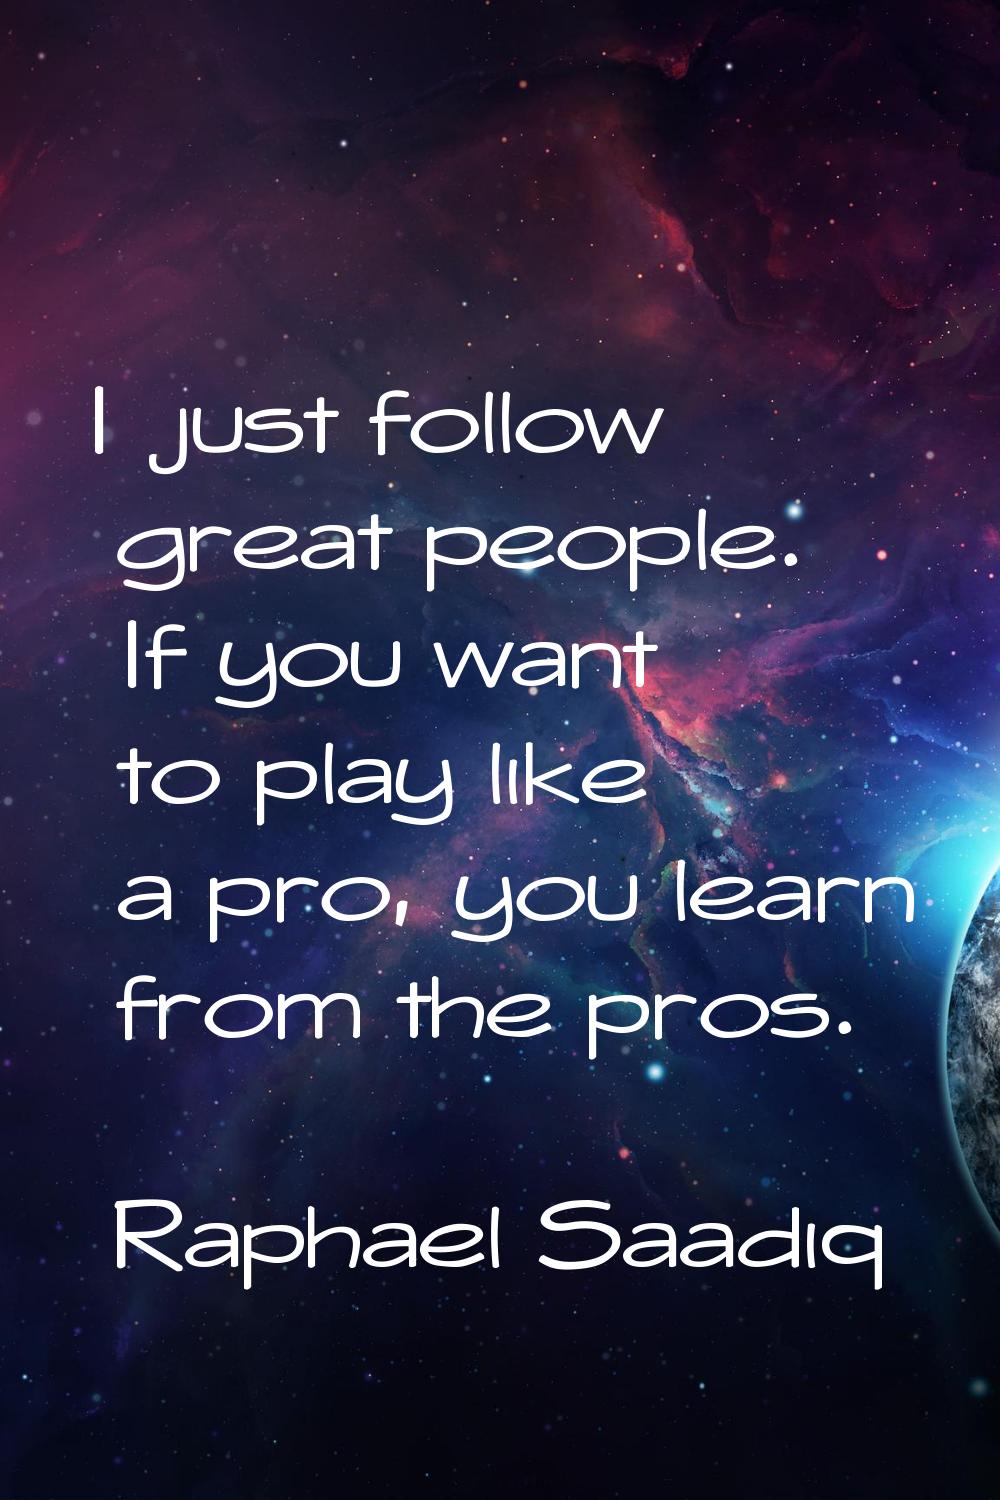 I just follow great people. If you want to play like a pro, you learn from the pros.